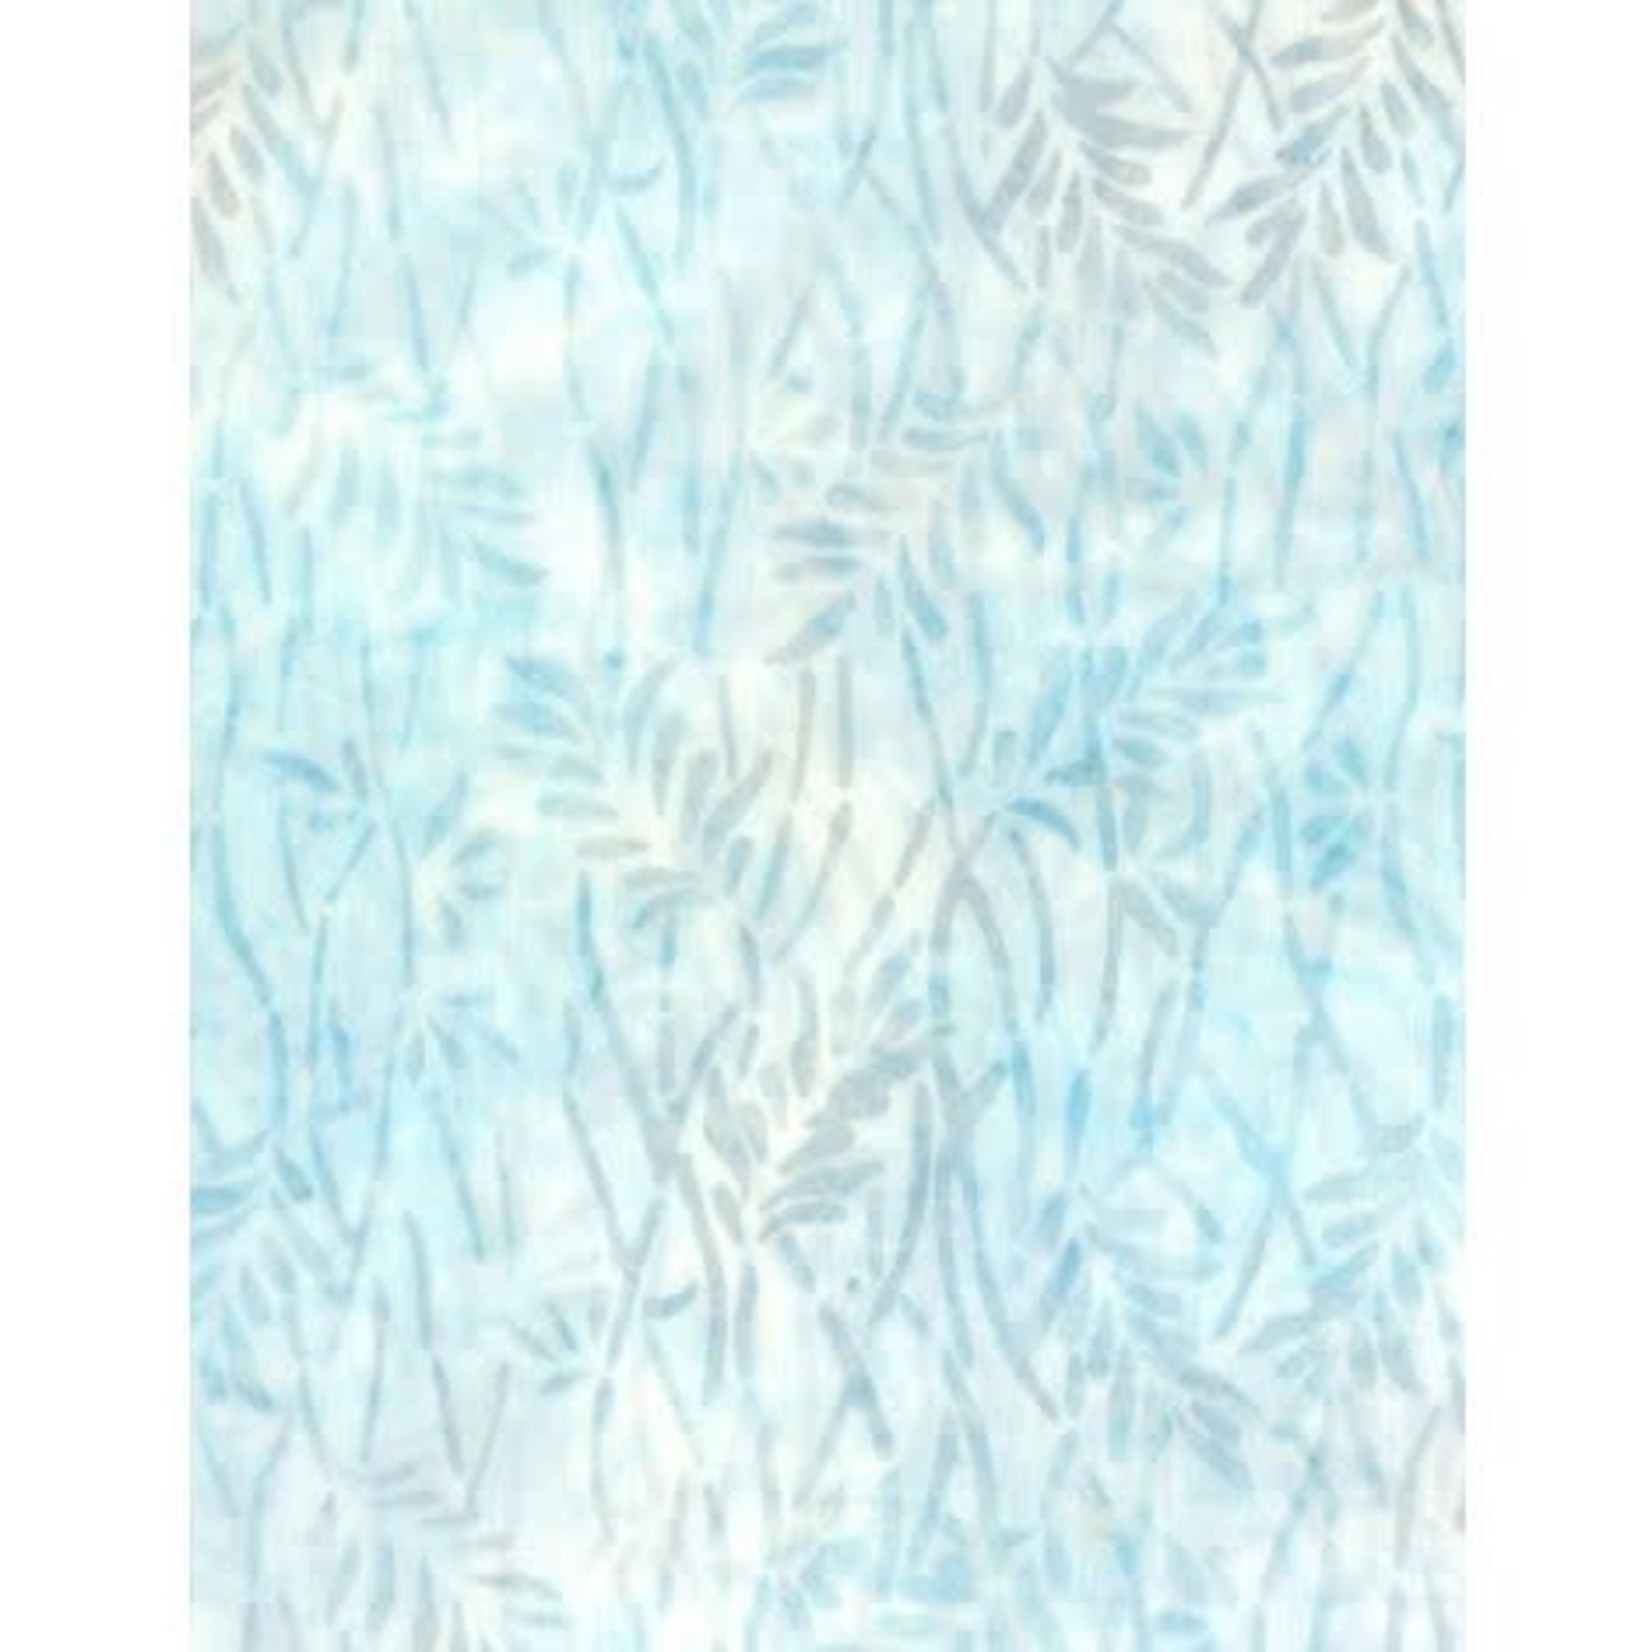 Wilmington Prints Ribbon Candy, Delicate Leaves Cream/Blue, Fabric B, Per Cm or $20/m